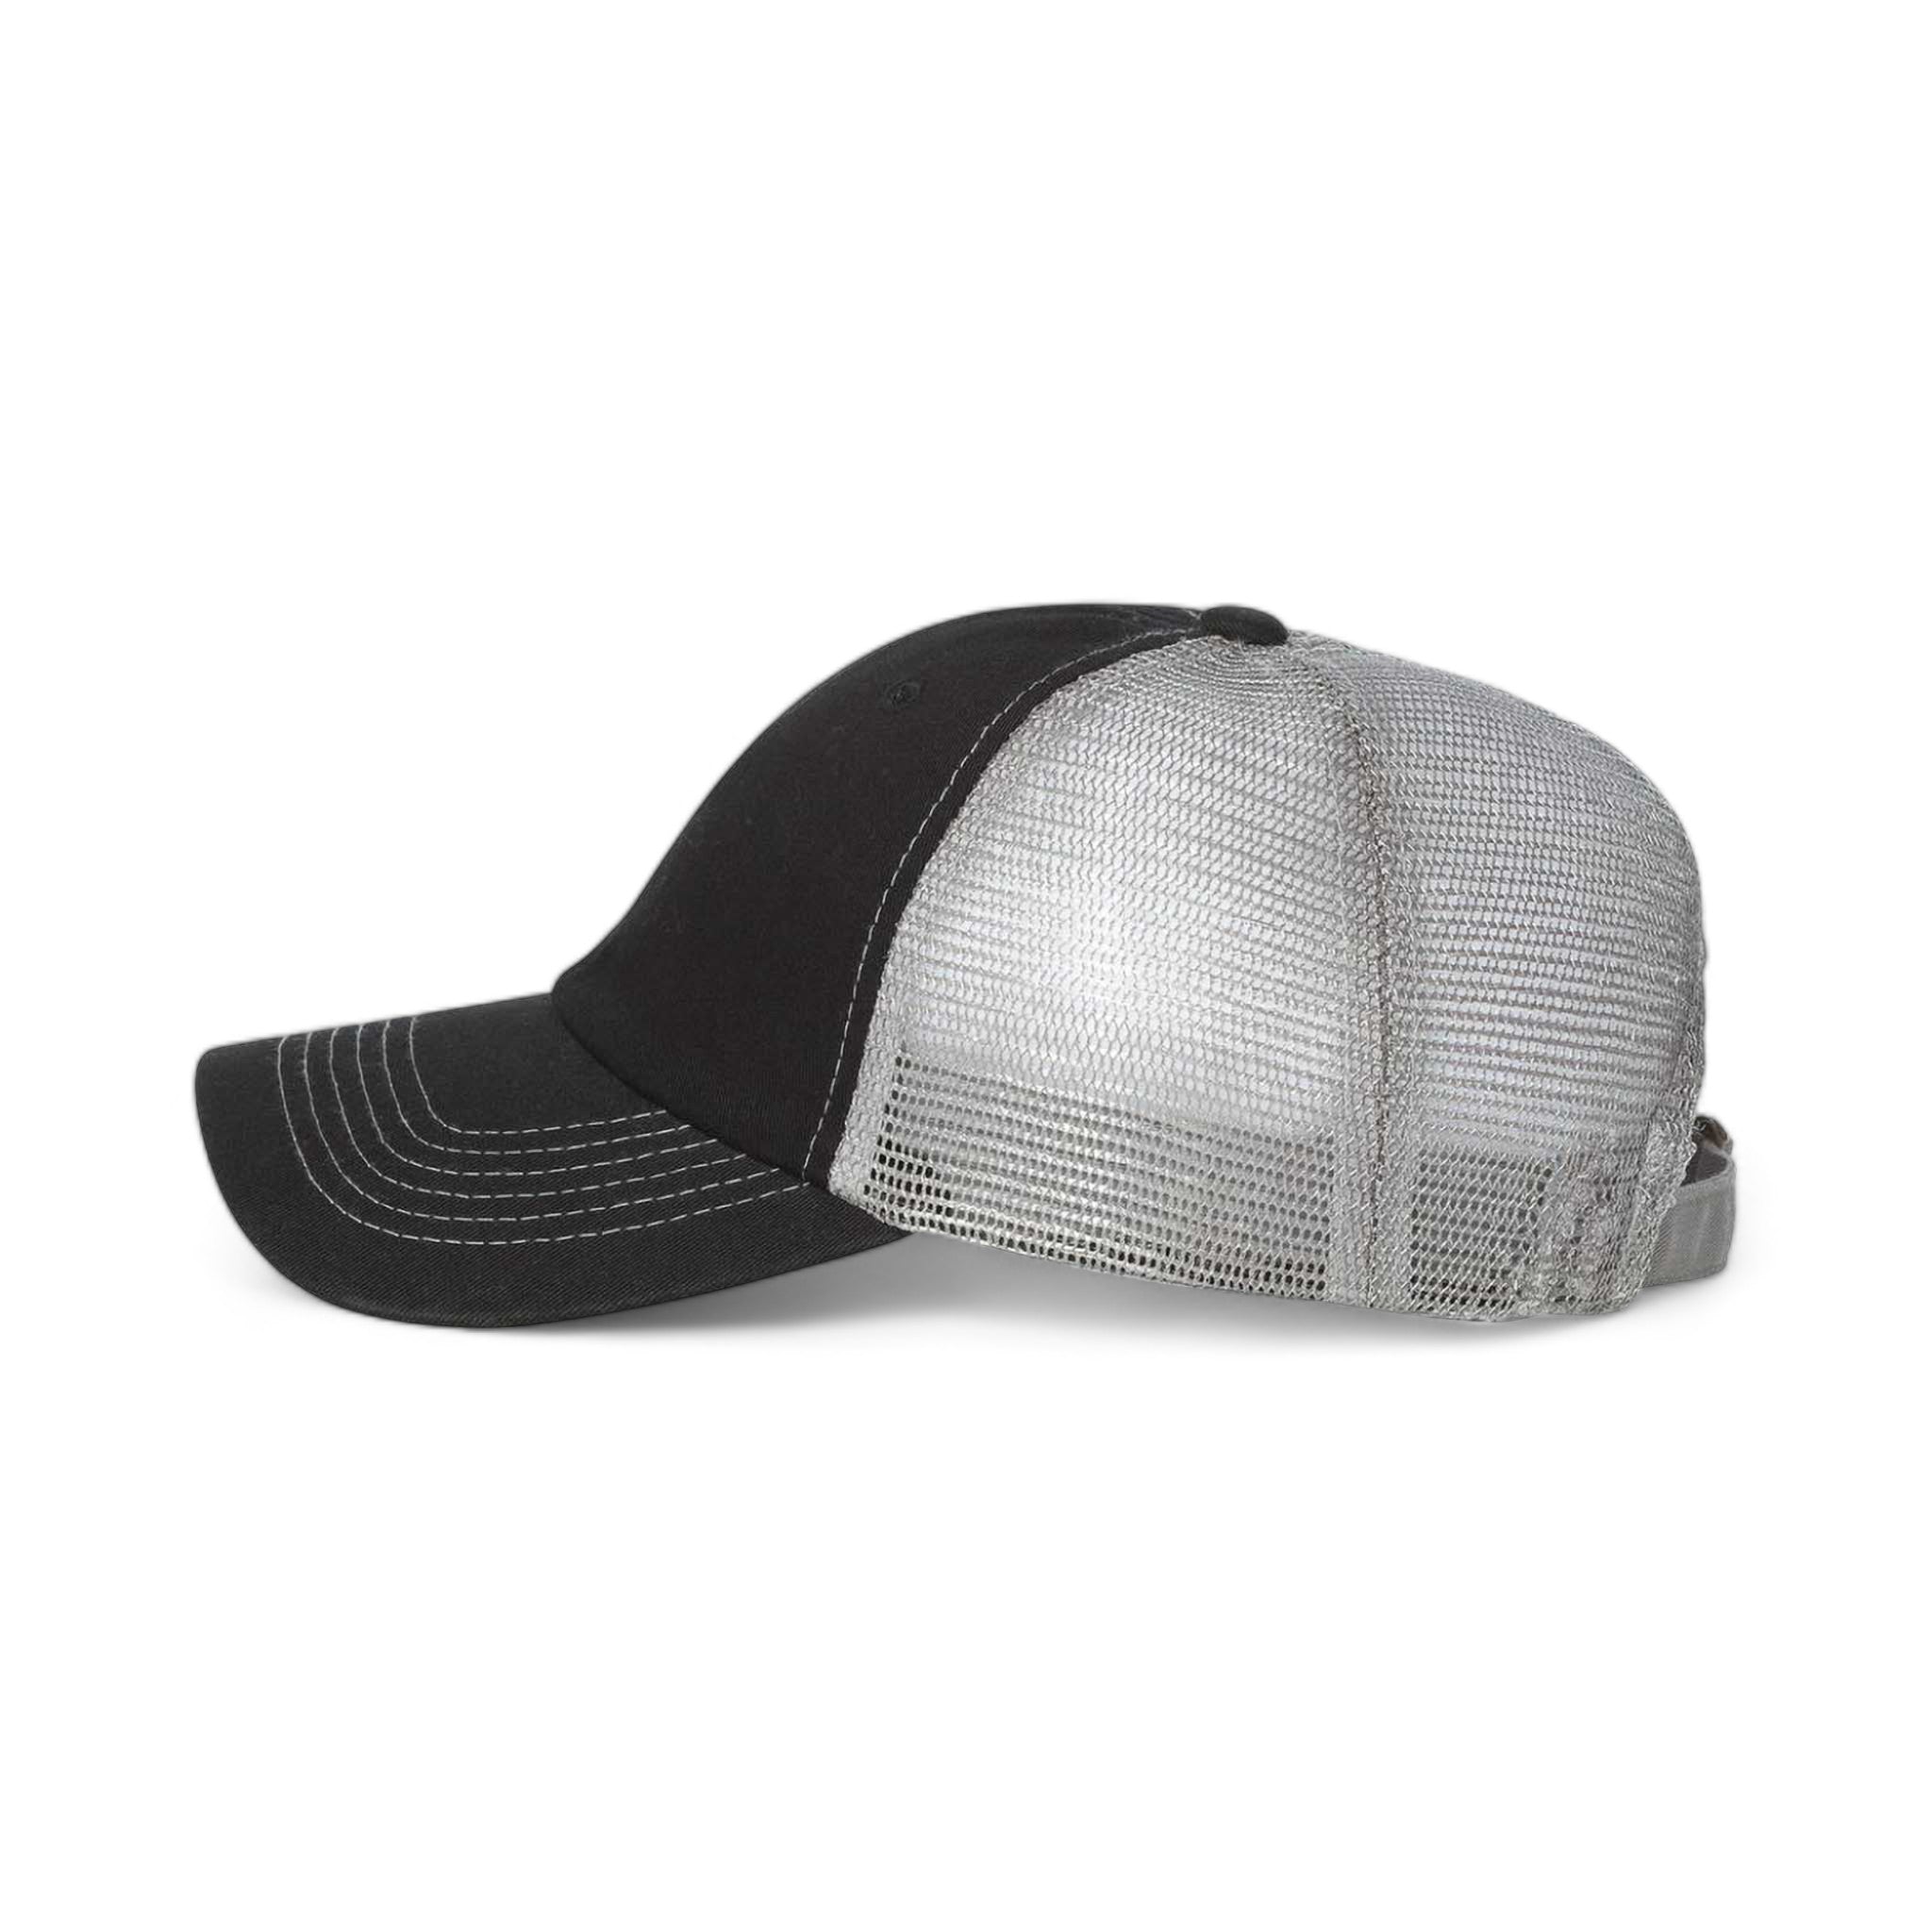 Side view of Sportsman 3100 custom hat in black and grey